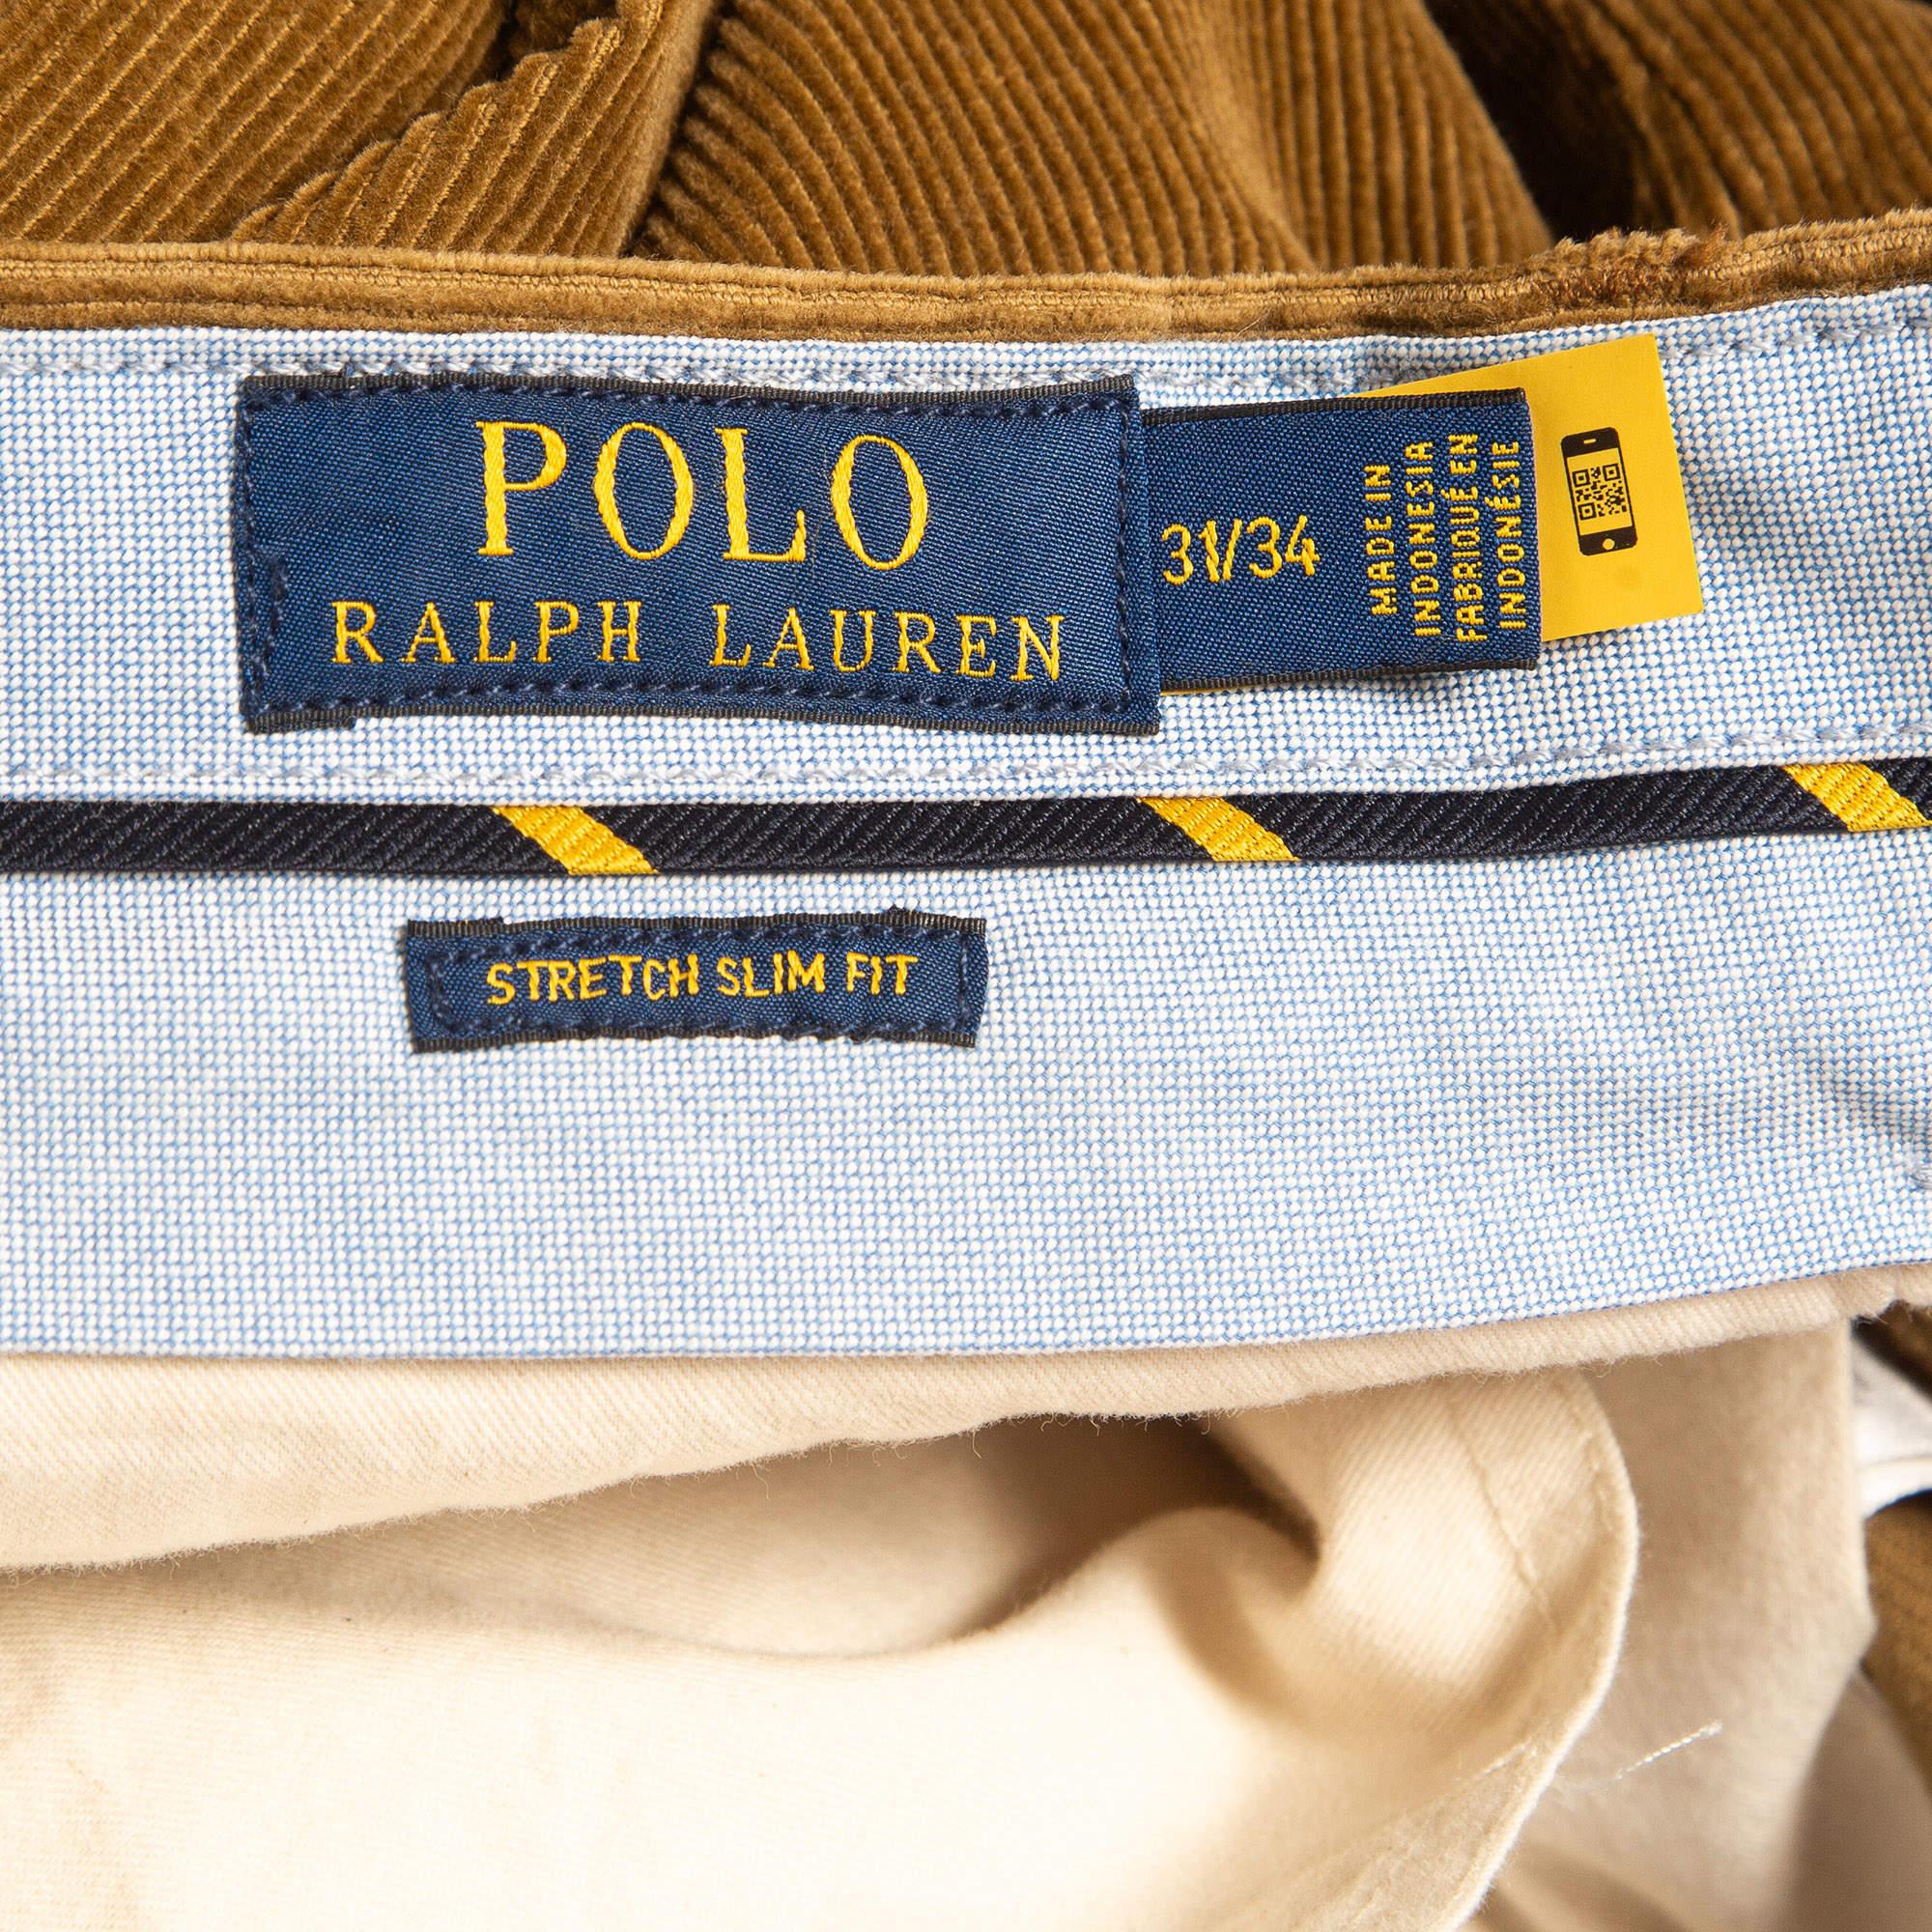 Polo Ralph Lauren Brown Corduroy Stretch Slim Fit Hose L Taille 31